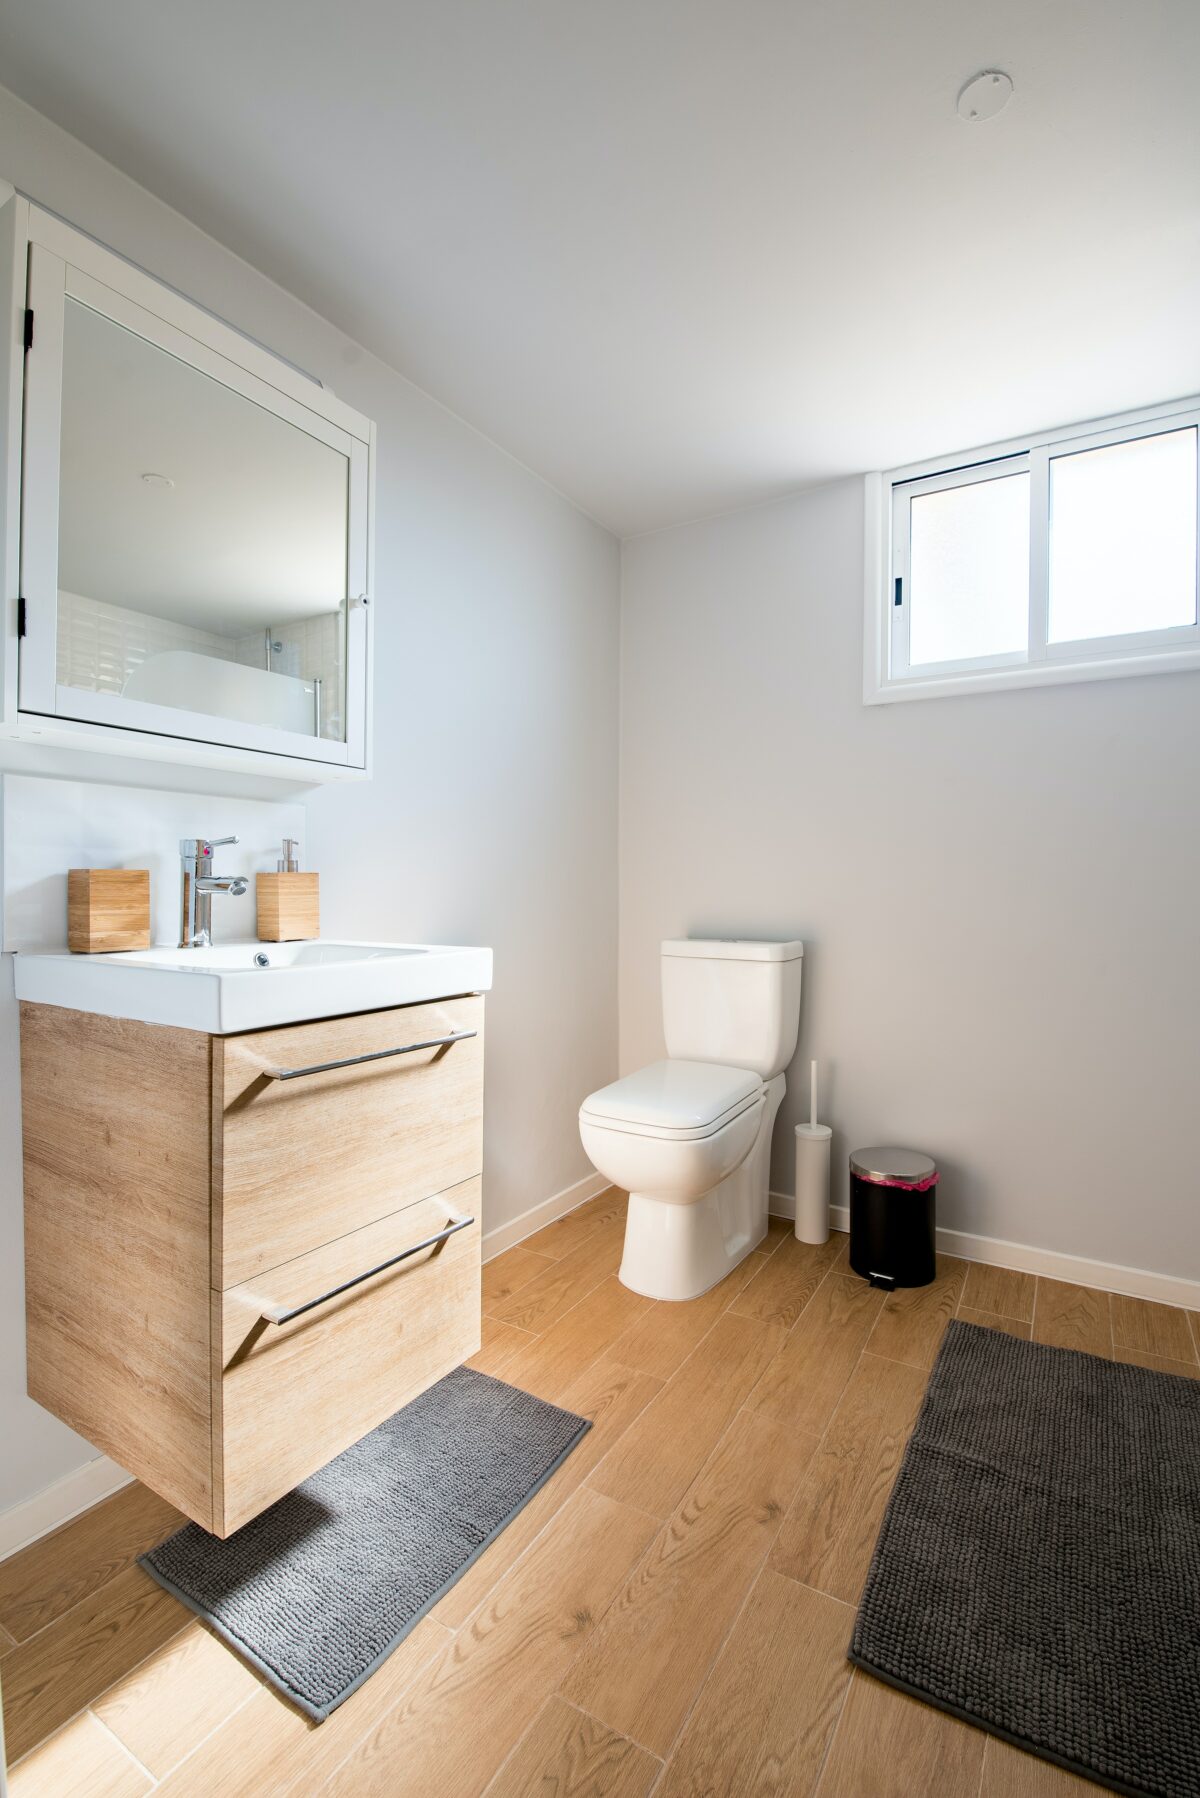 before and after: real-life bathroom renovation stories in dublin